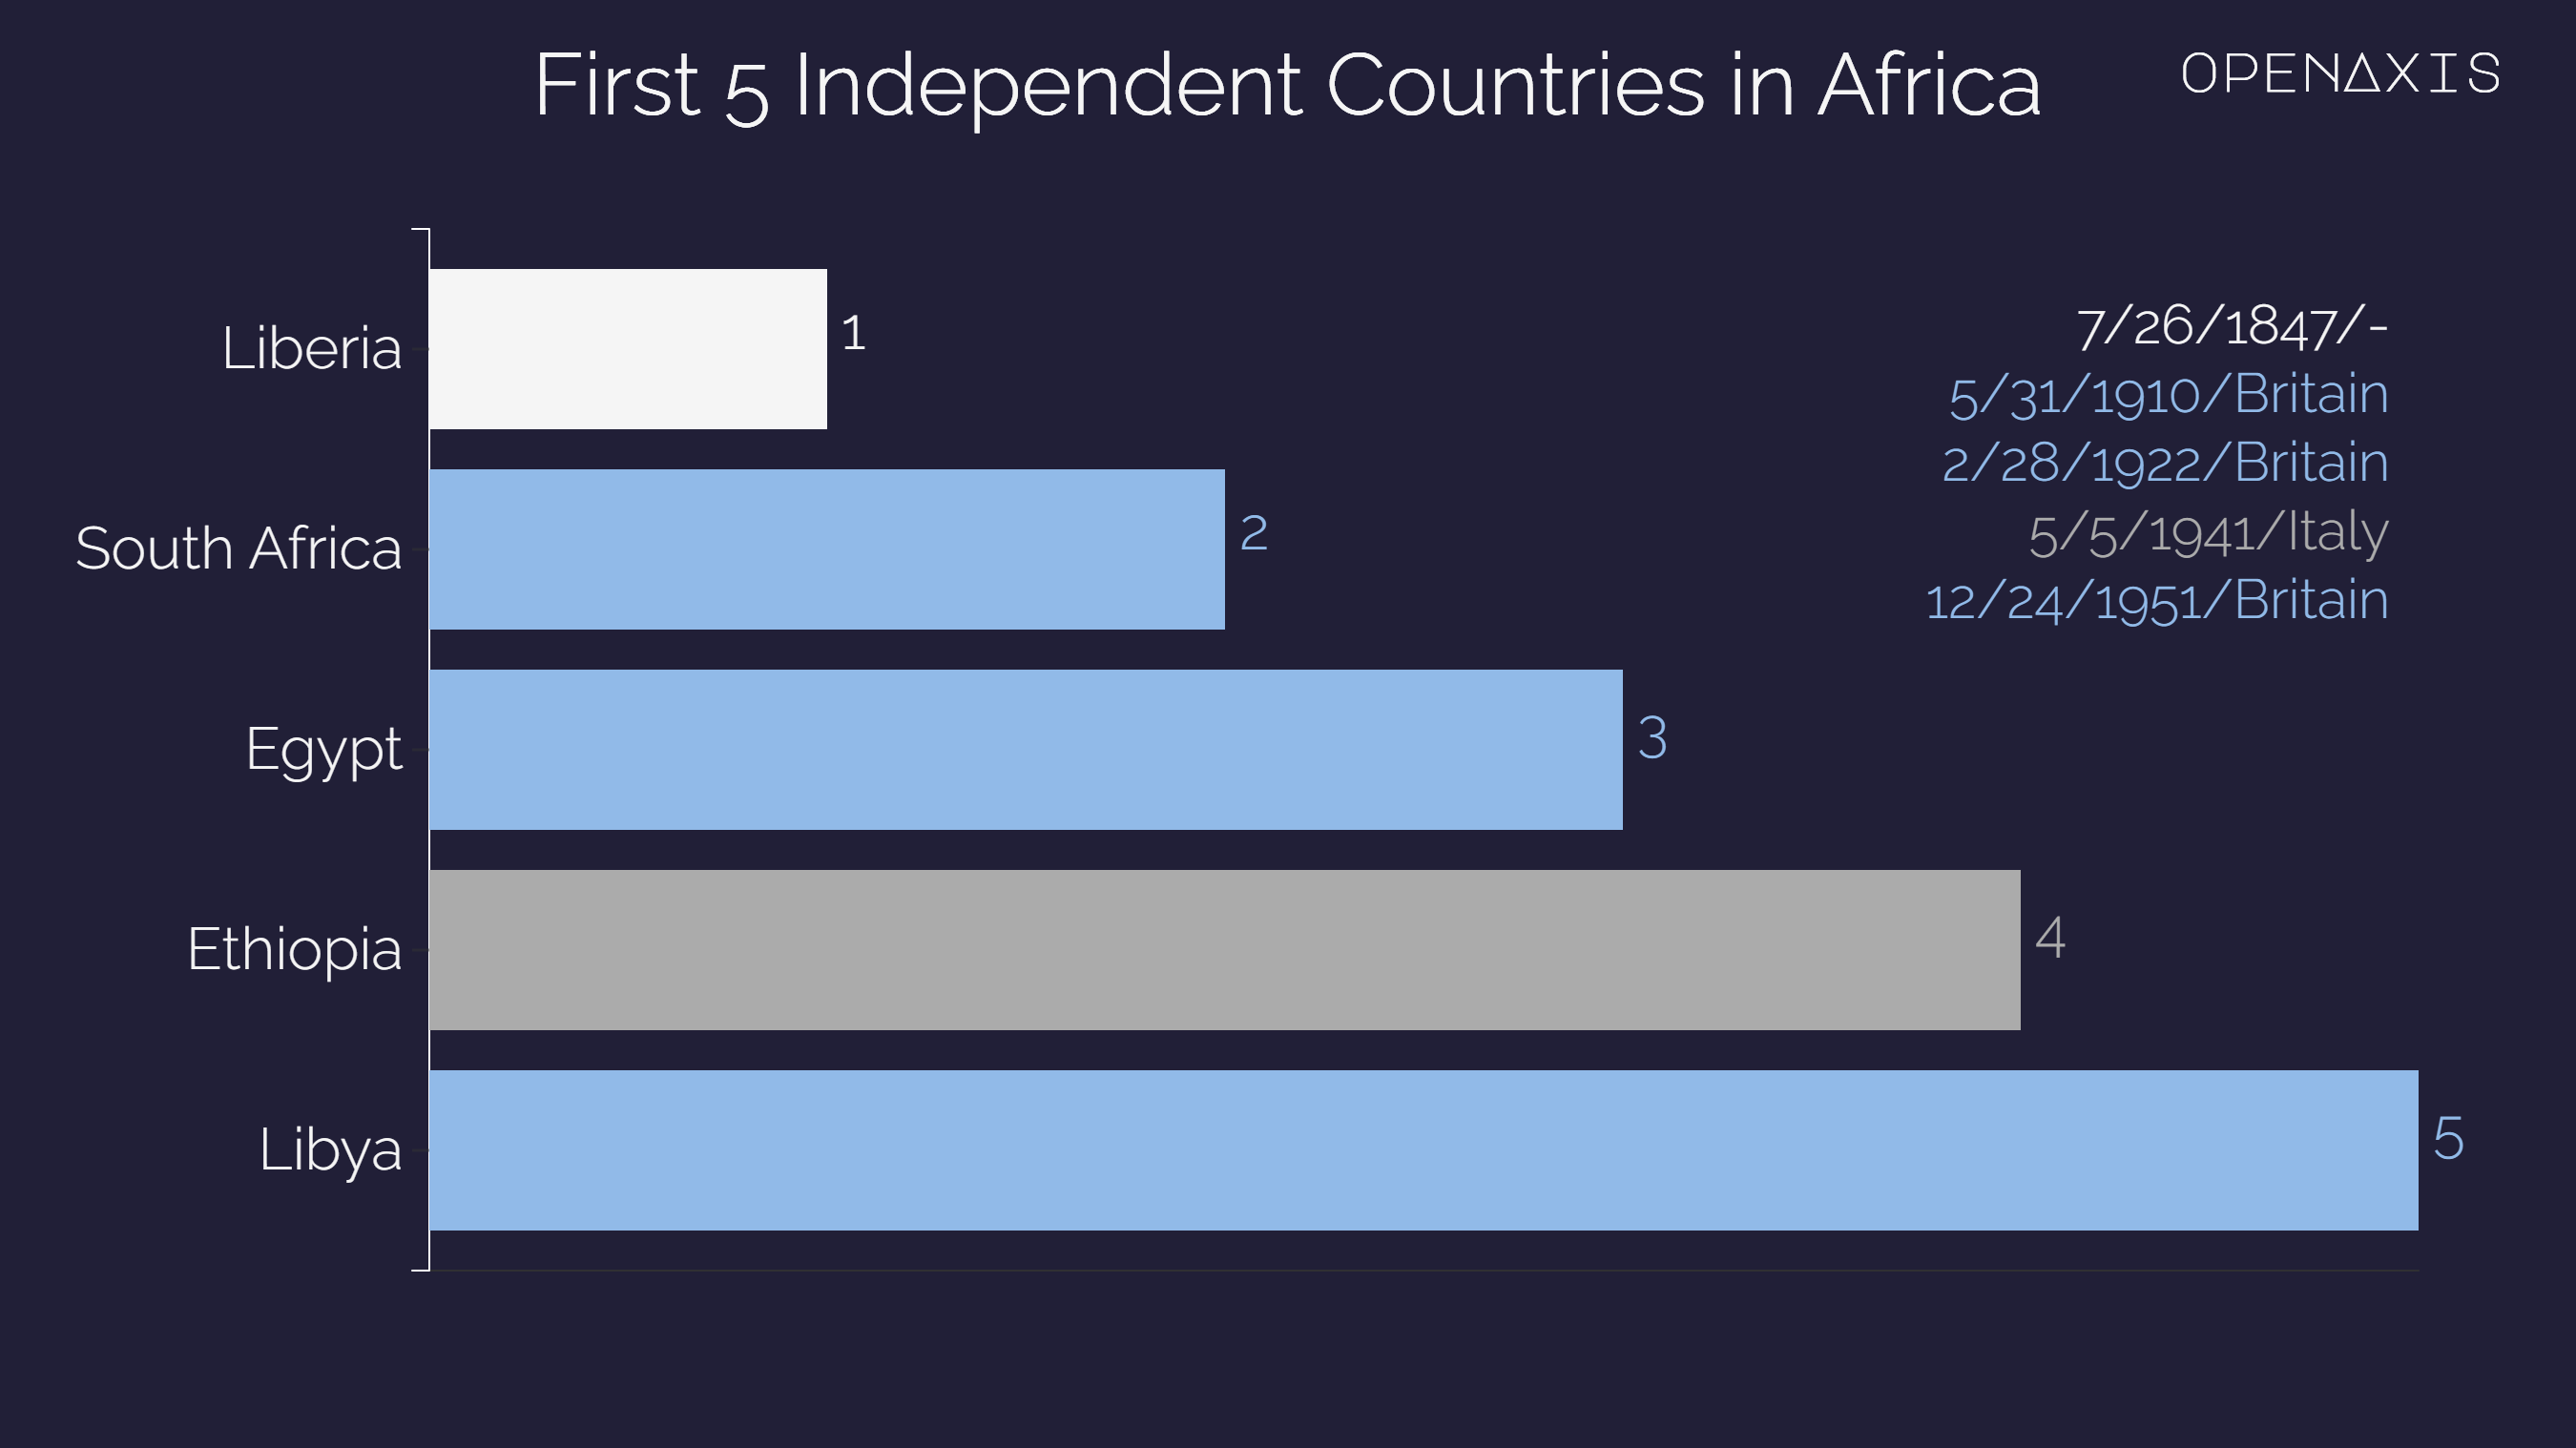 <p>Most nations in Africa were colonized by European states in the early modern era, including a burst of colonization in the Scramble for Africa from 1880 to 1900. But this condition was reversed over the course of the next century by independence movements. Here are the dates of independence for African nations.</p><p><br /></p><p>Liberia was the first African republic to proclaim its independence and is the continent's first and oldest modern republic. It was not colonized like the other countries in the top 5, mostly from Britain. </p><p><br /></p><p>﻿<a href="/search?q=%23africa" target="_blank">#africa</a>﻿ ﻿<a href="/search?q=%23independence" target="_blank">#independence</a>﻿ ﻿<span data-index="0" data-denotation-char data-id="0" data-value="&lt;a href=&quot;/search?q=%23decolonization&quot; target=_self&gt;#decolonization" data-link="/search?q=%23decolonization">﻿<span contenteditable="false"><span></span><a href="/search?q=%23decolonization" target="_self">#decolonization</a></span>﻿</span> ﻿</p><p><br /></p><p>Source: <a href="/data/3846" target="_blank">ThoughtCo, Wikipedia</a></p><p><br /></p>